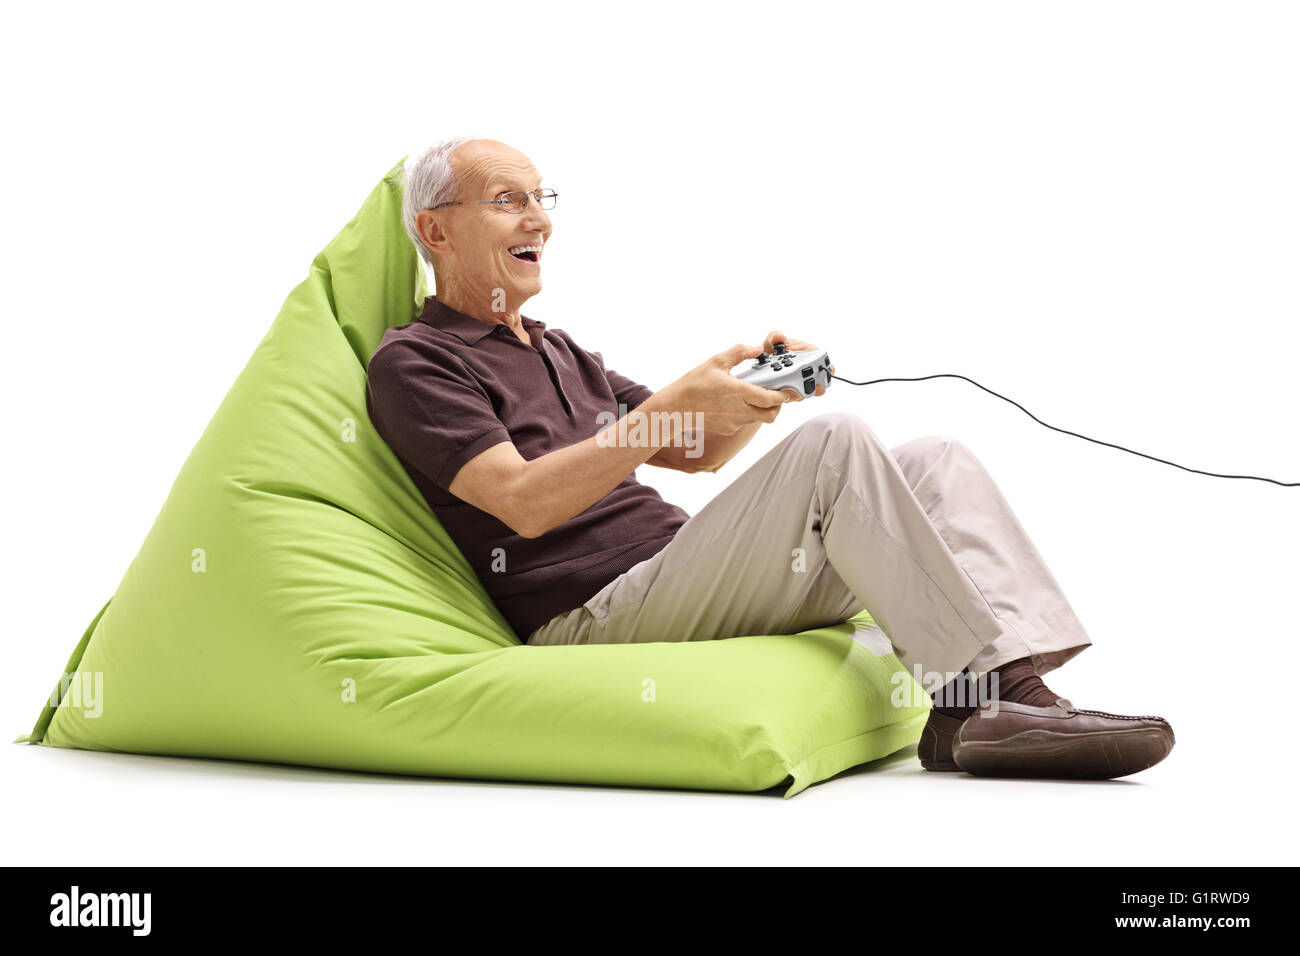 Joyful senior gentleman playing video games seated on a green beanbag isolated on white background Stock Photo